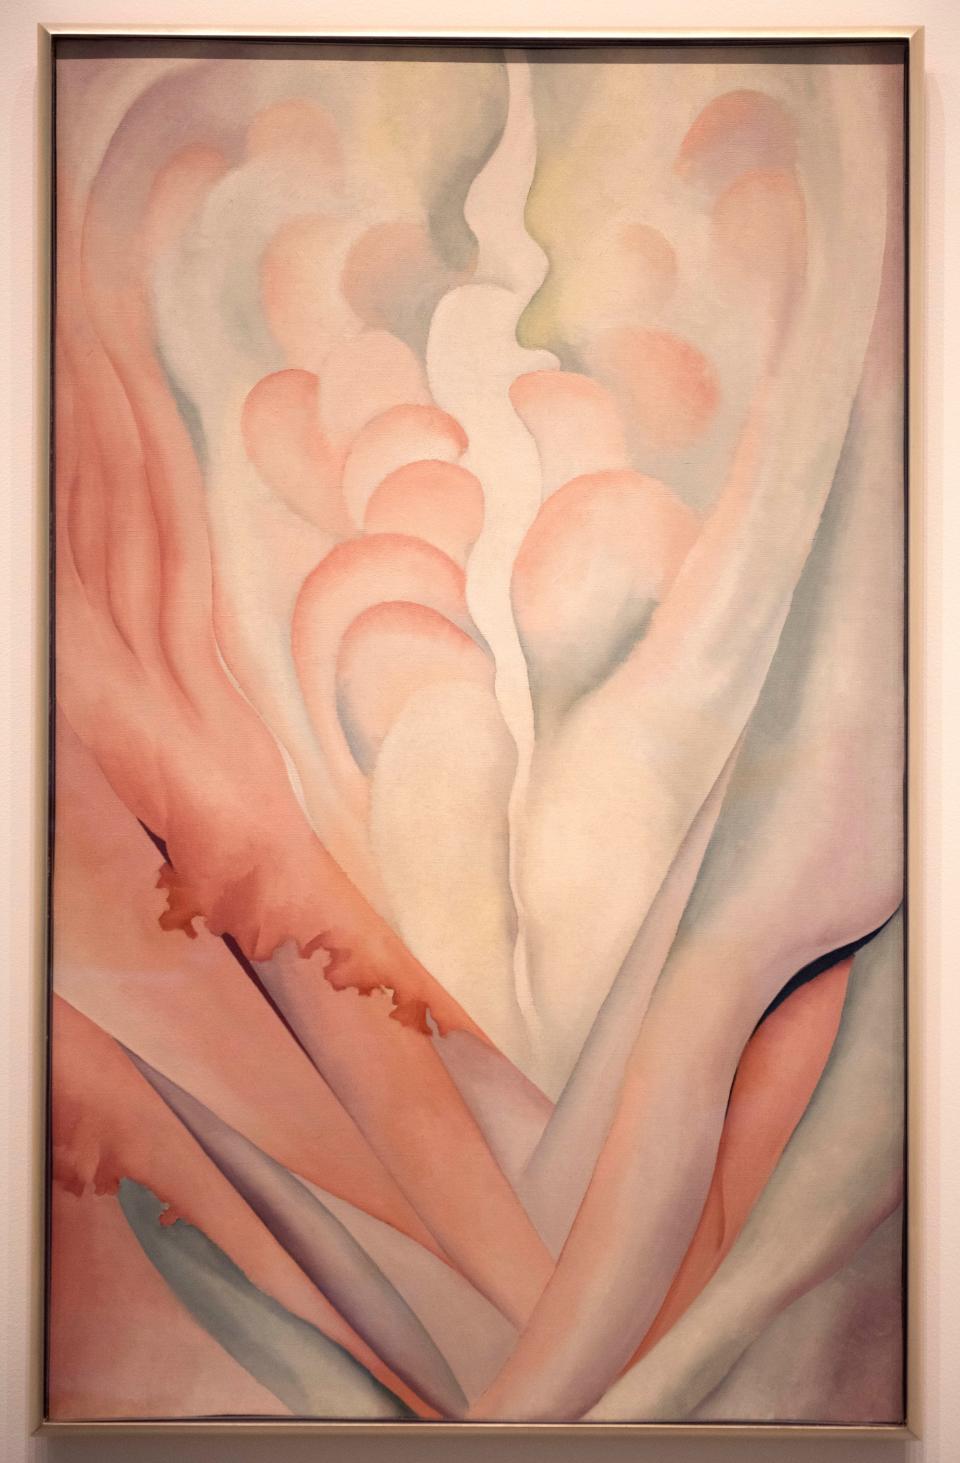 Flower Abstraction, 1924 by Georgia O'Keefe is included in At the Dawn of a New Age: Early Twentieth-Century American Modernism exhibit the Norton from March 18 through July 16, 2023 in West Palm Beach.